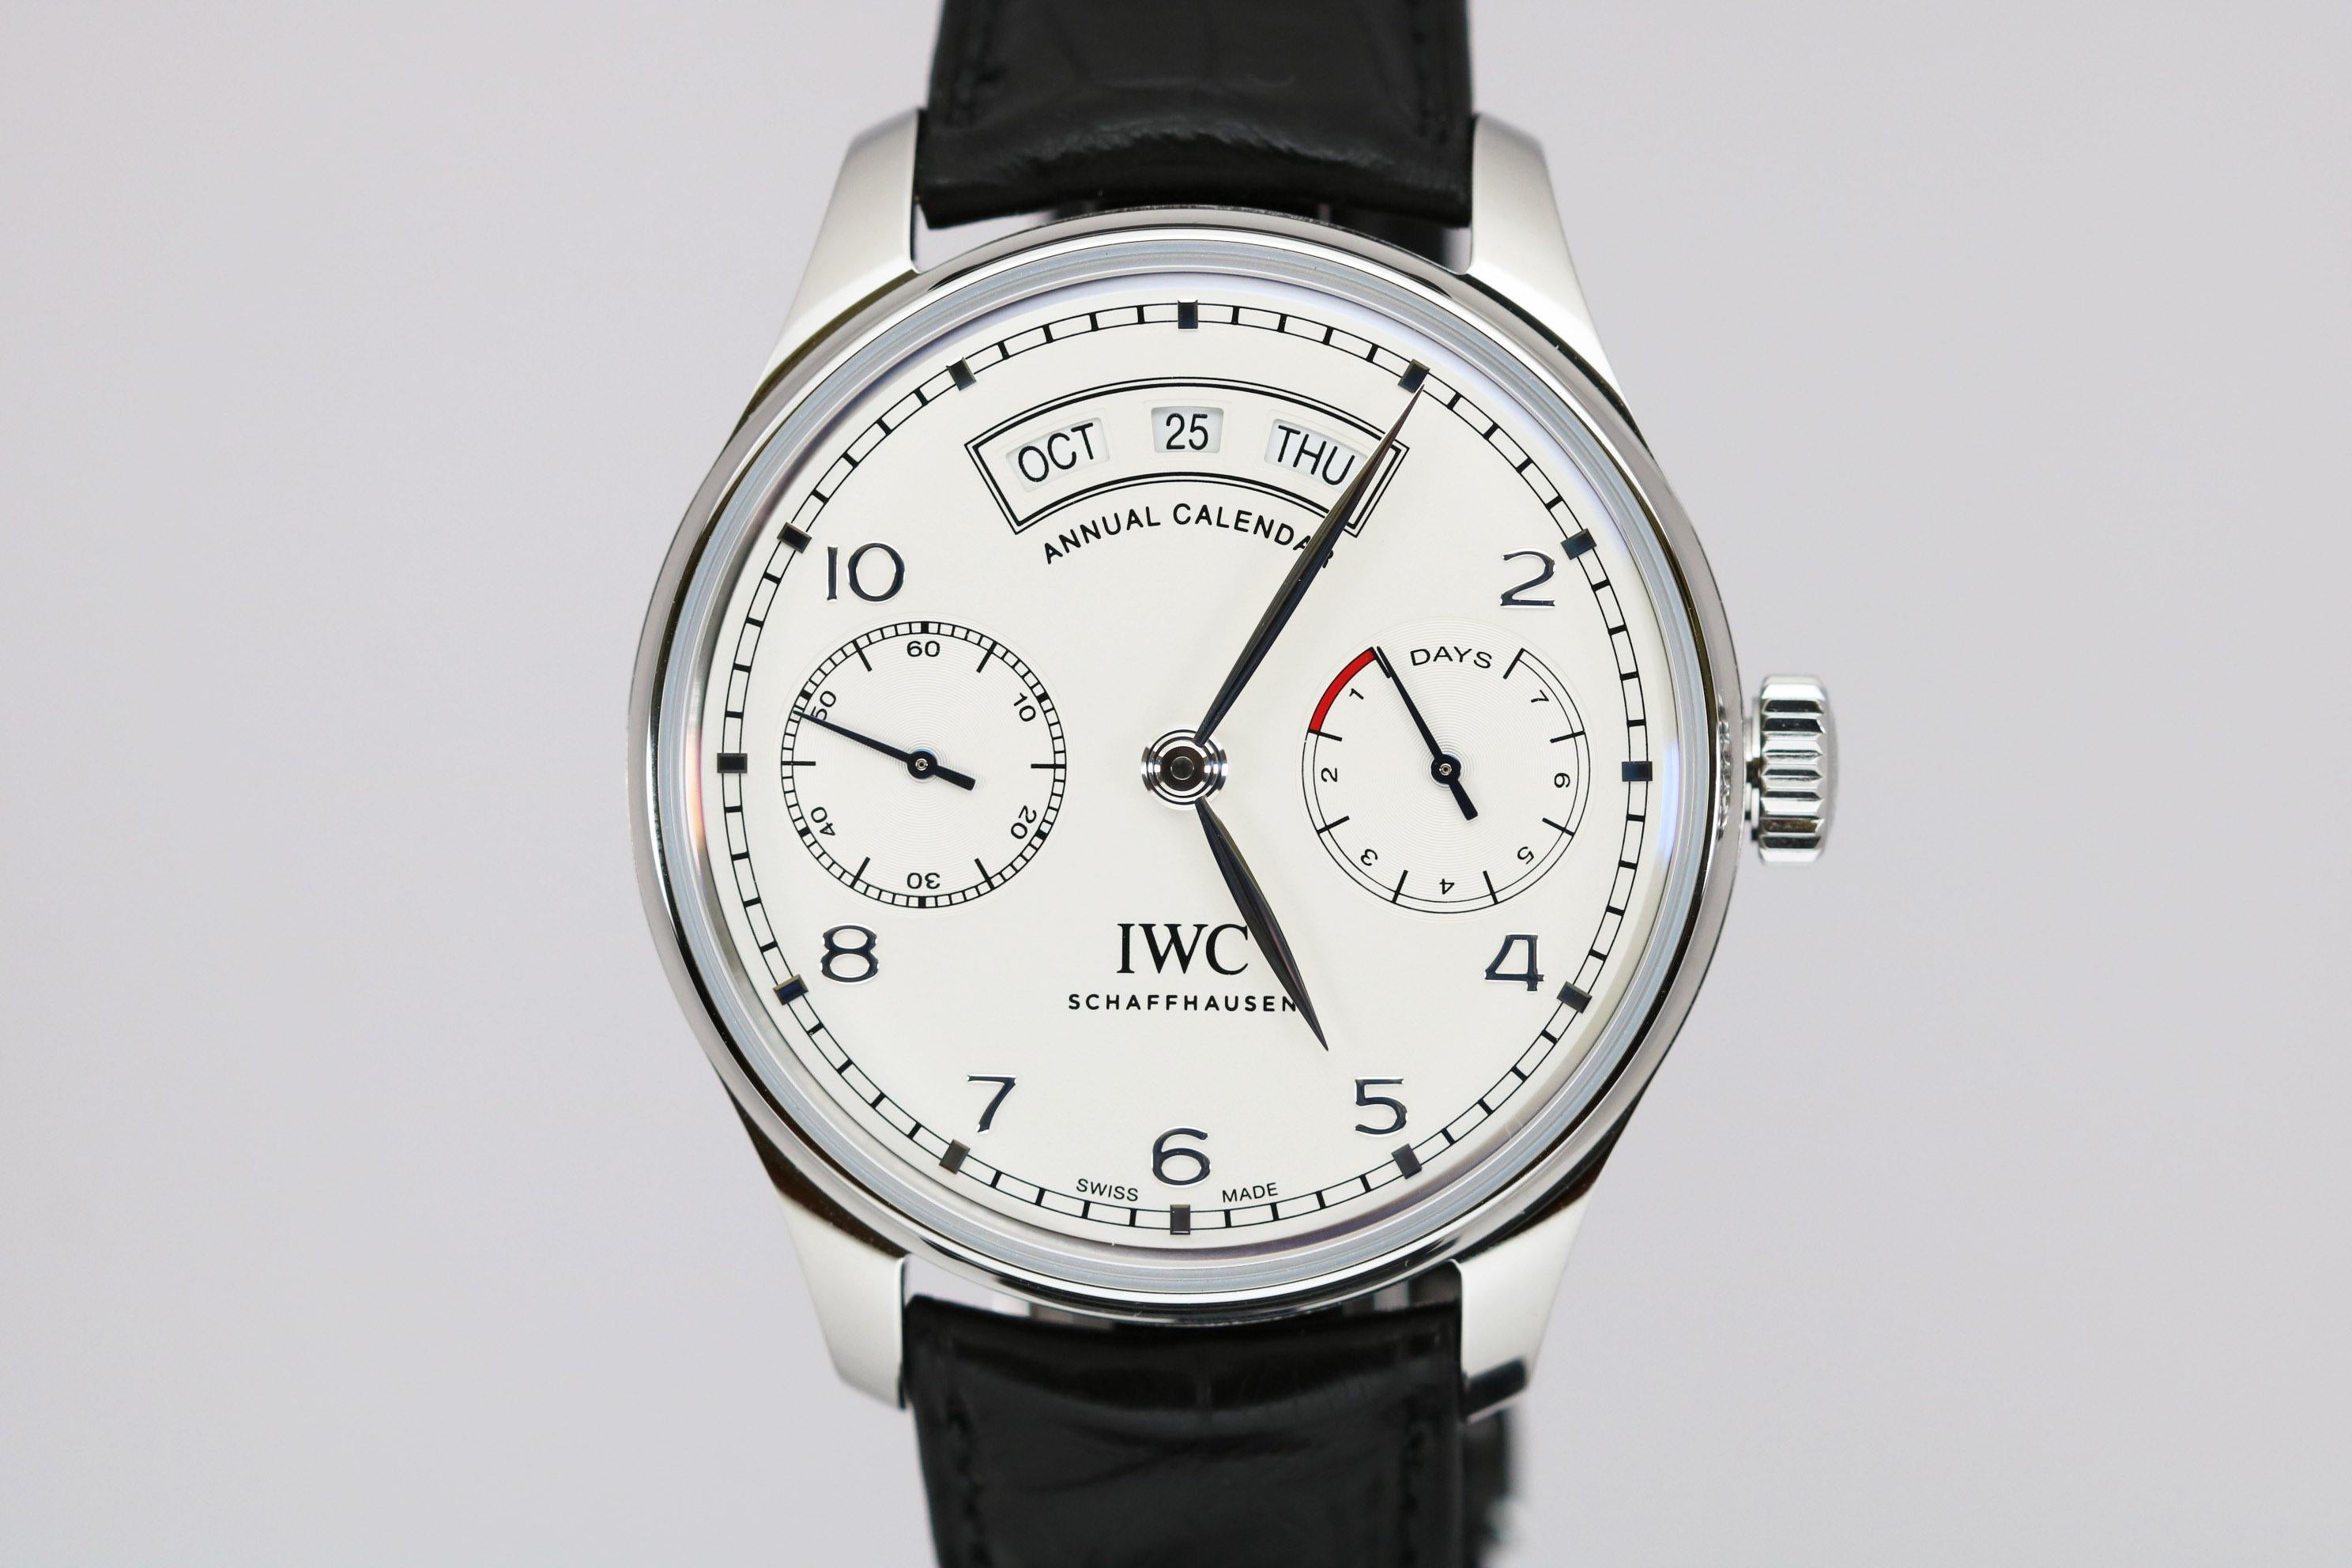 IWC Portugieser Annual Calendar Ref IW503501. The oversized 44mm case has an exhibition back showing the automatic movement that features an Annual Calendar, Power Reserve, and Subsidiary Seconds, Comes on an alligator strap with a deployant clasp.